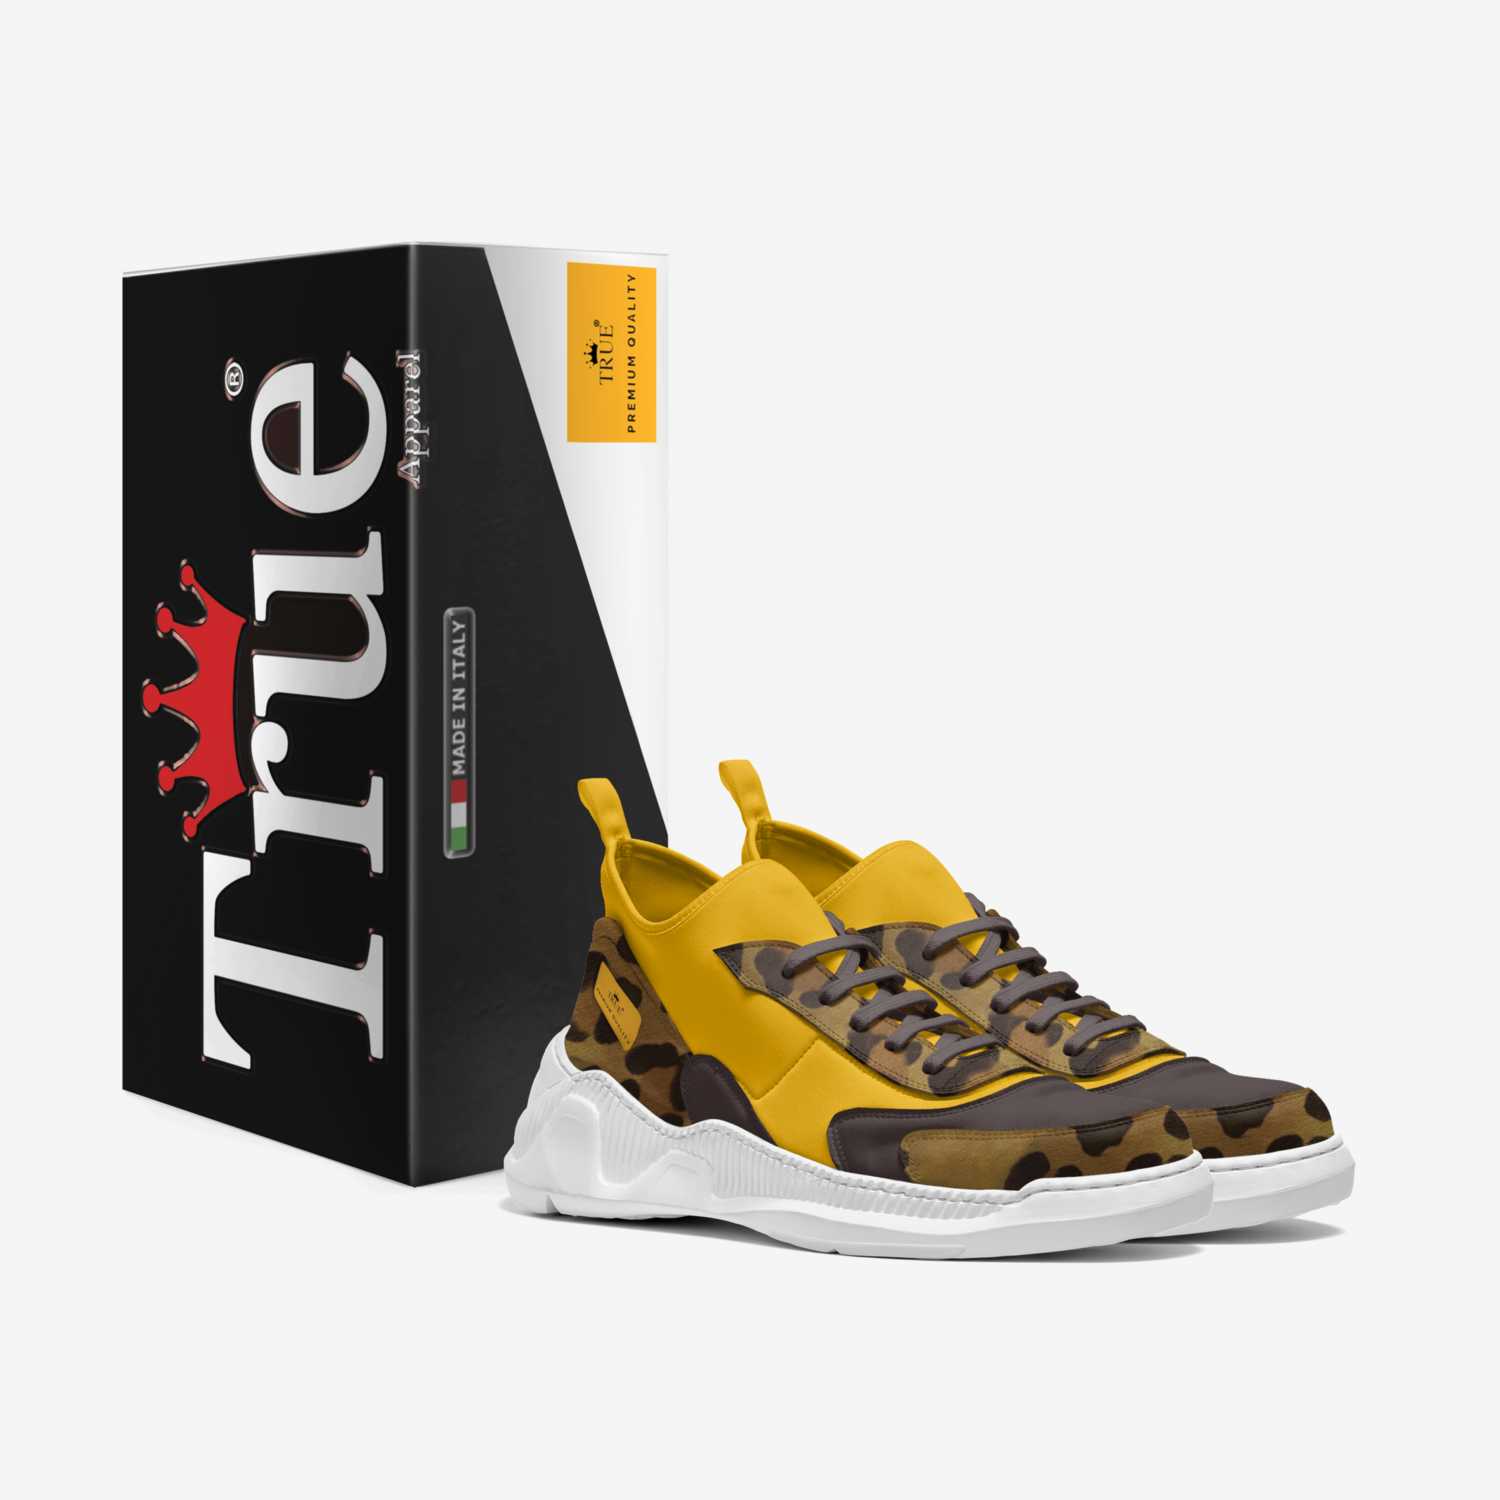 TRUE APPAREL custom made in Italy shoes by TRUE APPAREL | Box view